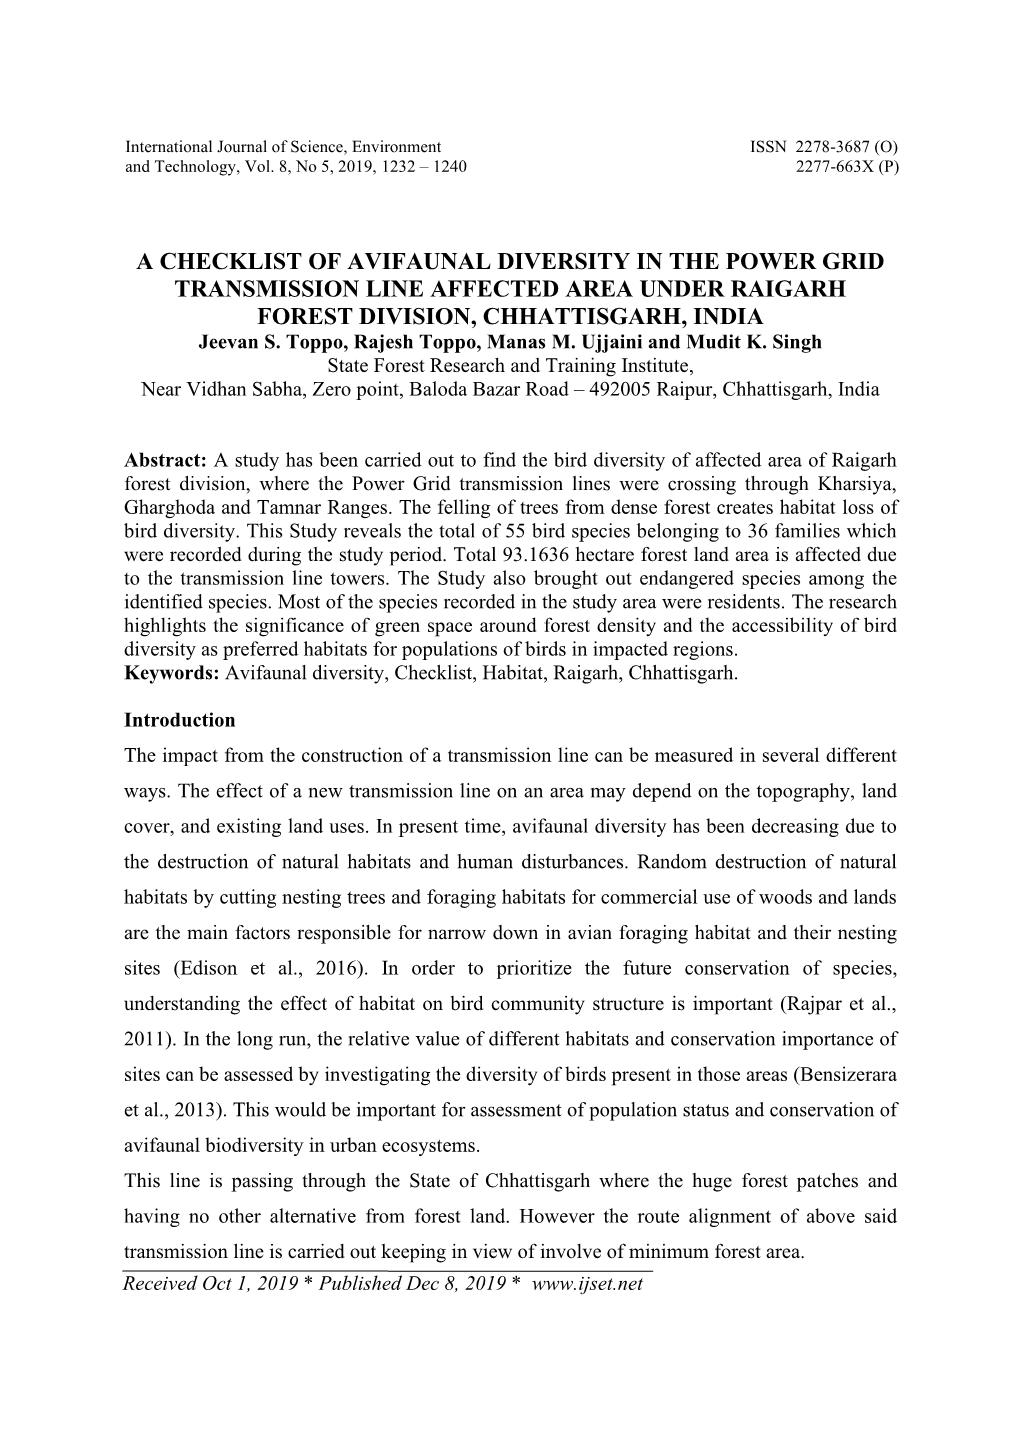 A CHECKLIST of AVIFAUNAL DIVERSITY in the POWER GRID TRANSMISSION LINE AFFECTED AREA UNDER RAIGARH FOREST DIVISION, CHHATTISGARH, INDIA Jeevan S